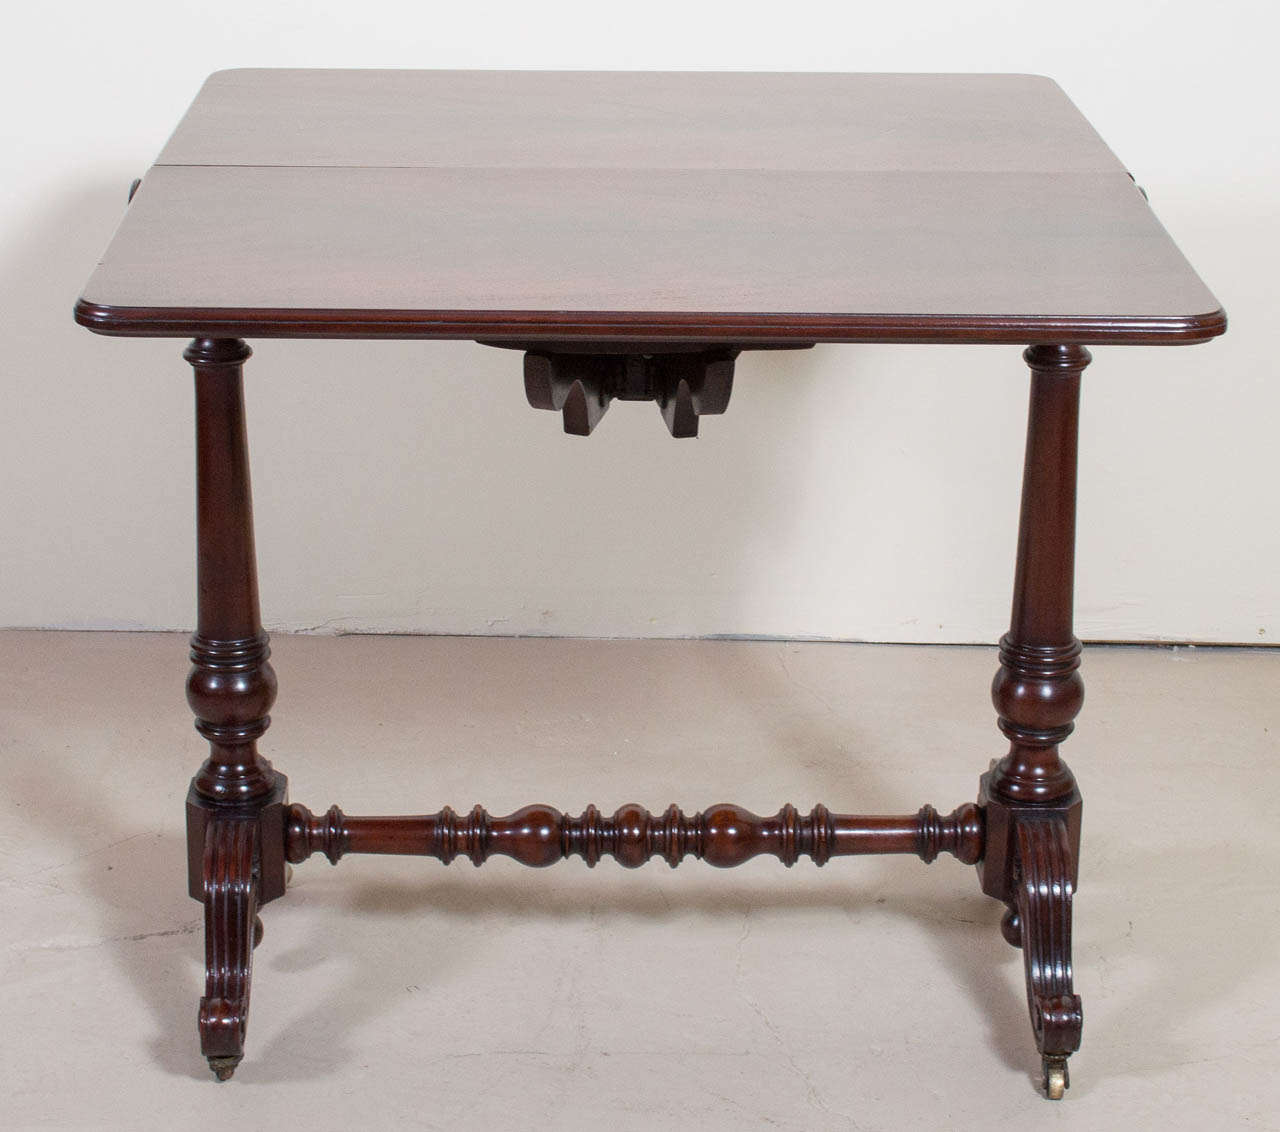 A unique and unusual Victorian flame mahogany leaf lap table. The cylinder hinged top allows one or both leaves to completely drop. The table is supported by two turned legs joined by a turned stretcher on castors. This table retains its beautiful,